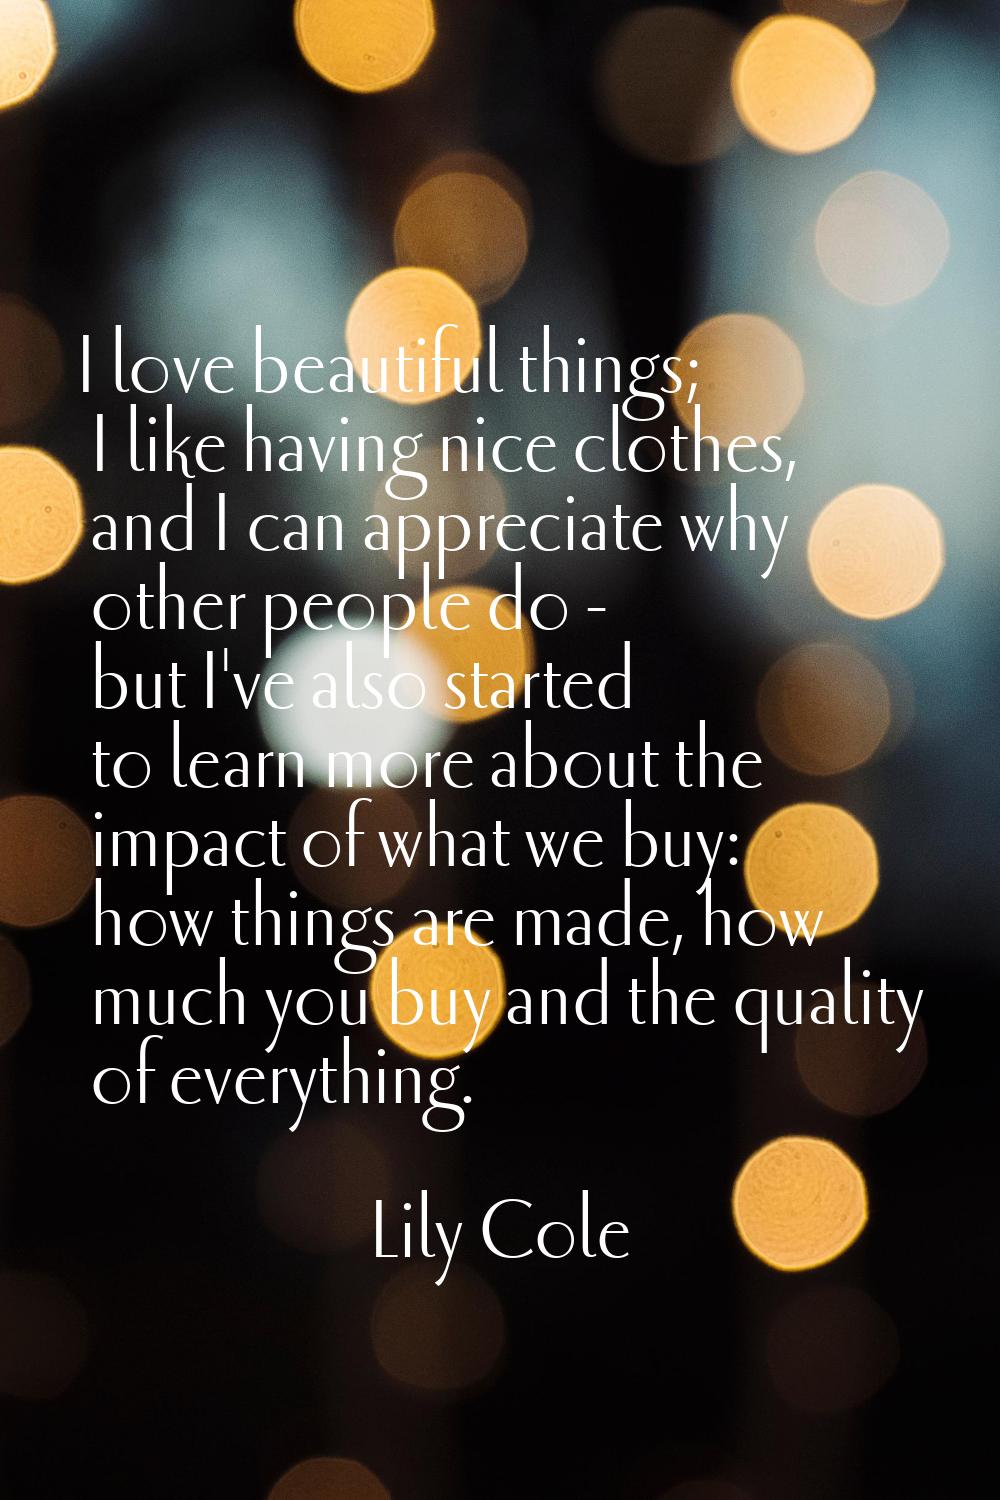 I love beautiful things; I like having nice clothes, and I can appreciate why other people do - but